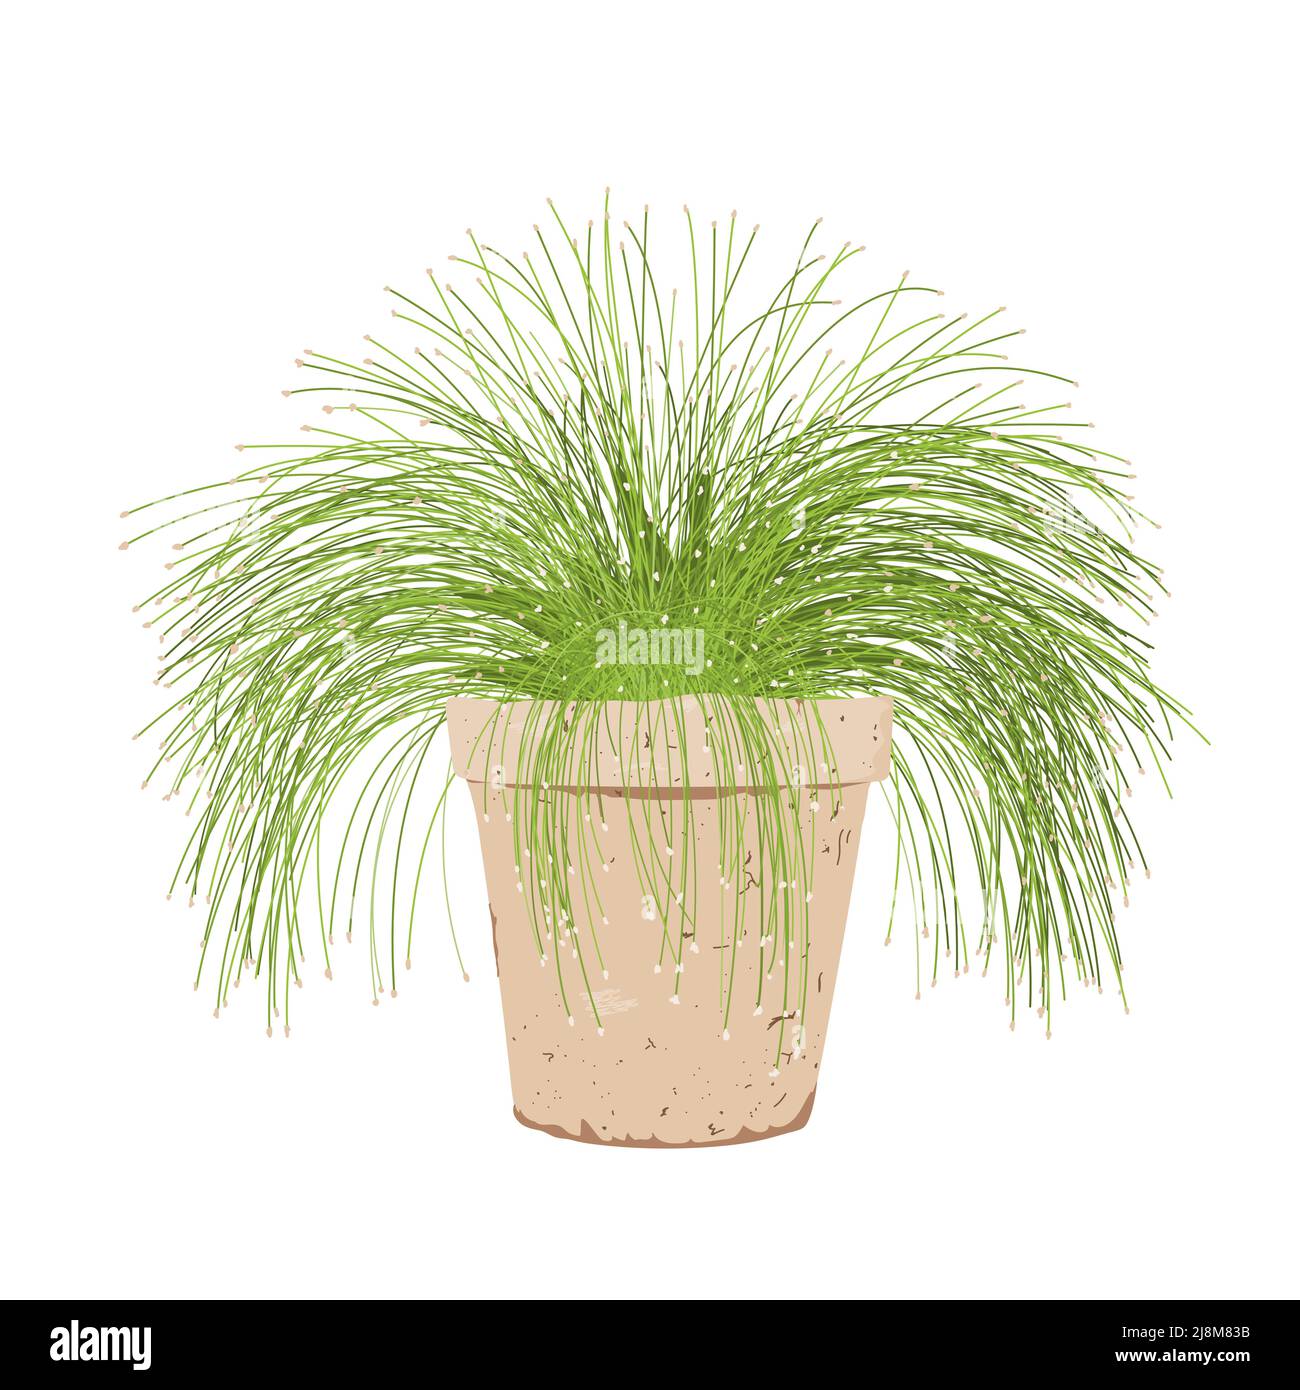 Potted isolepis plant. Fiber optic grass in a flower pot isolated on white. Scirpus cernuus vector Stock Vector